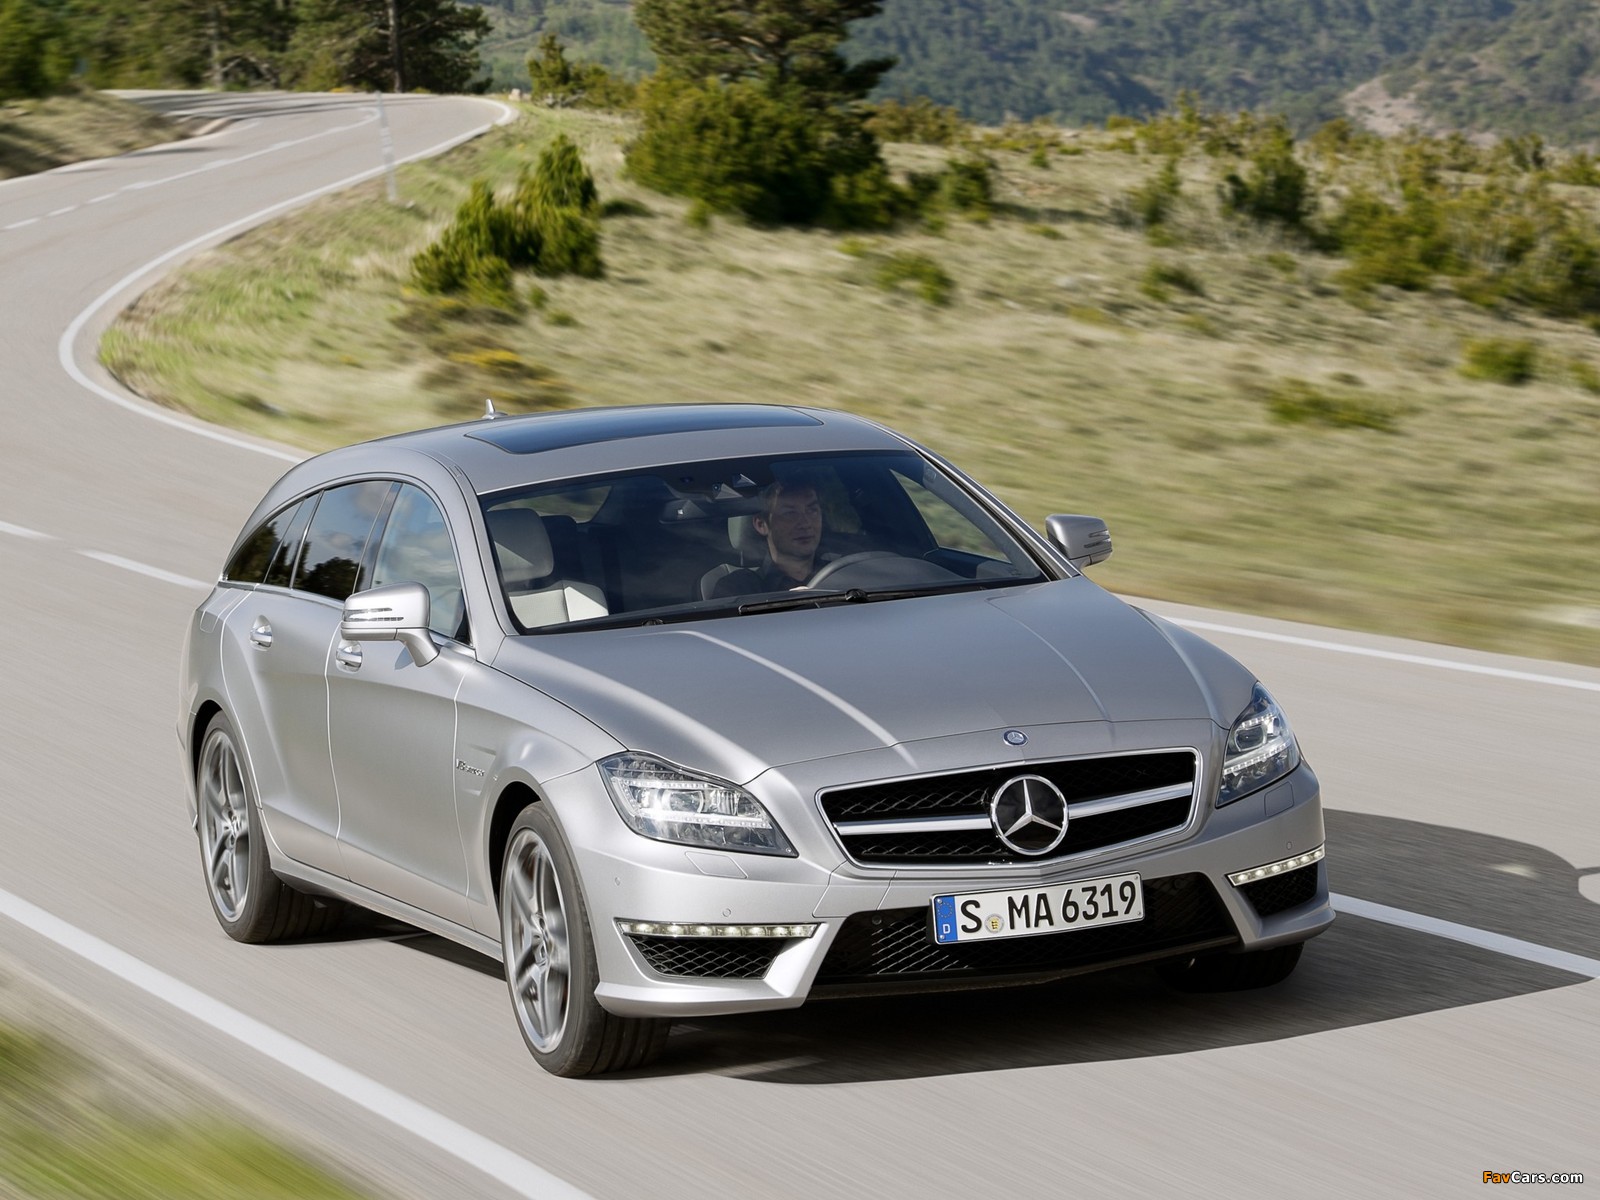 Mercedes-Benz CLS 63 AMG Shooting Brake (X218) 2012 pictures (1600 x 1200)